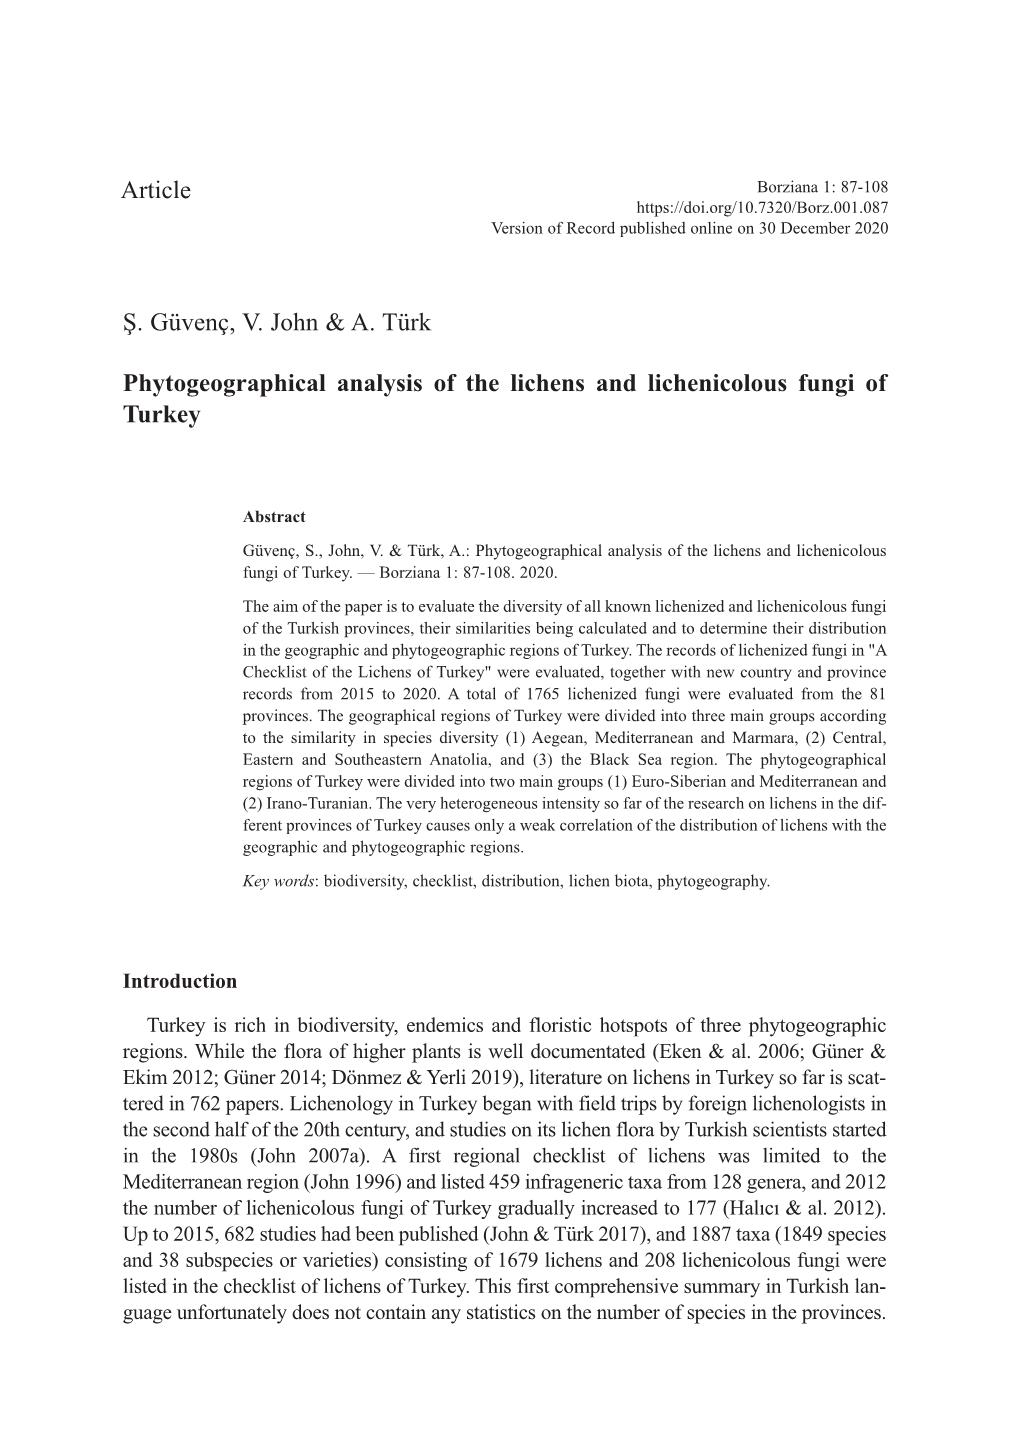 Phytogeographical Analysis of the Lichens and Lichenicolous Fungi of Turkey